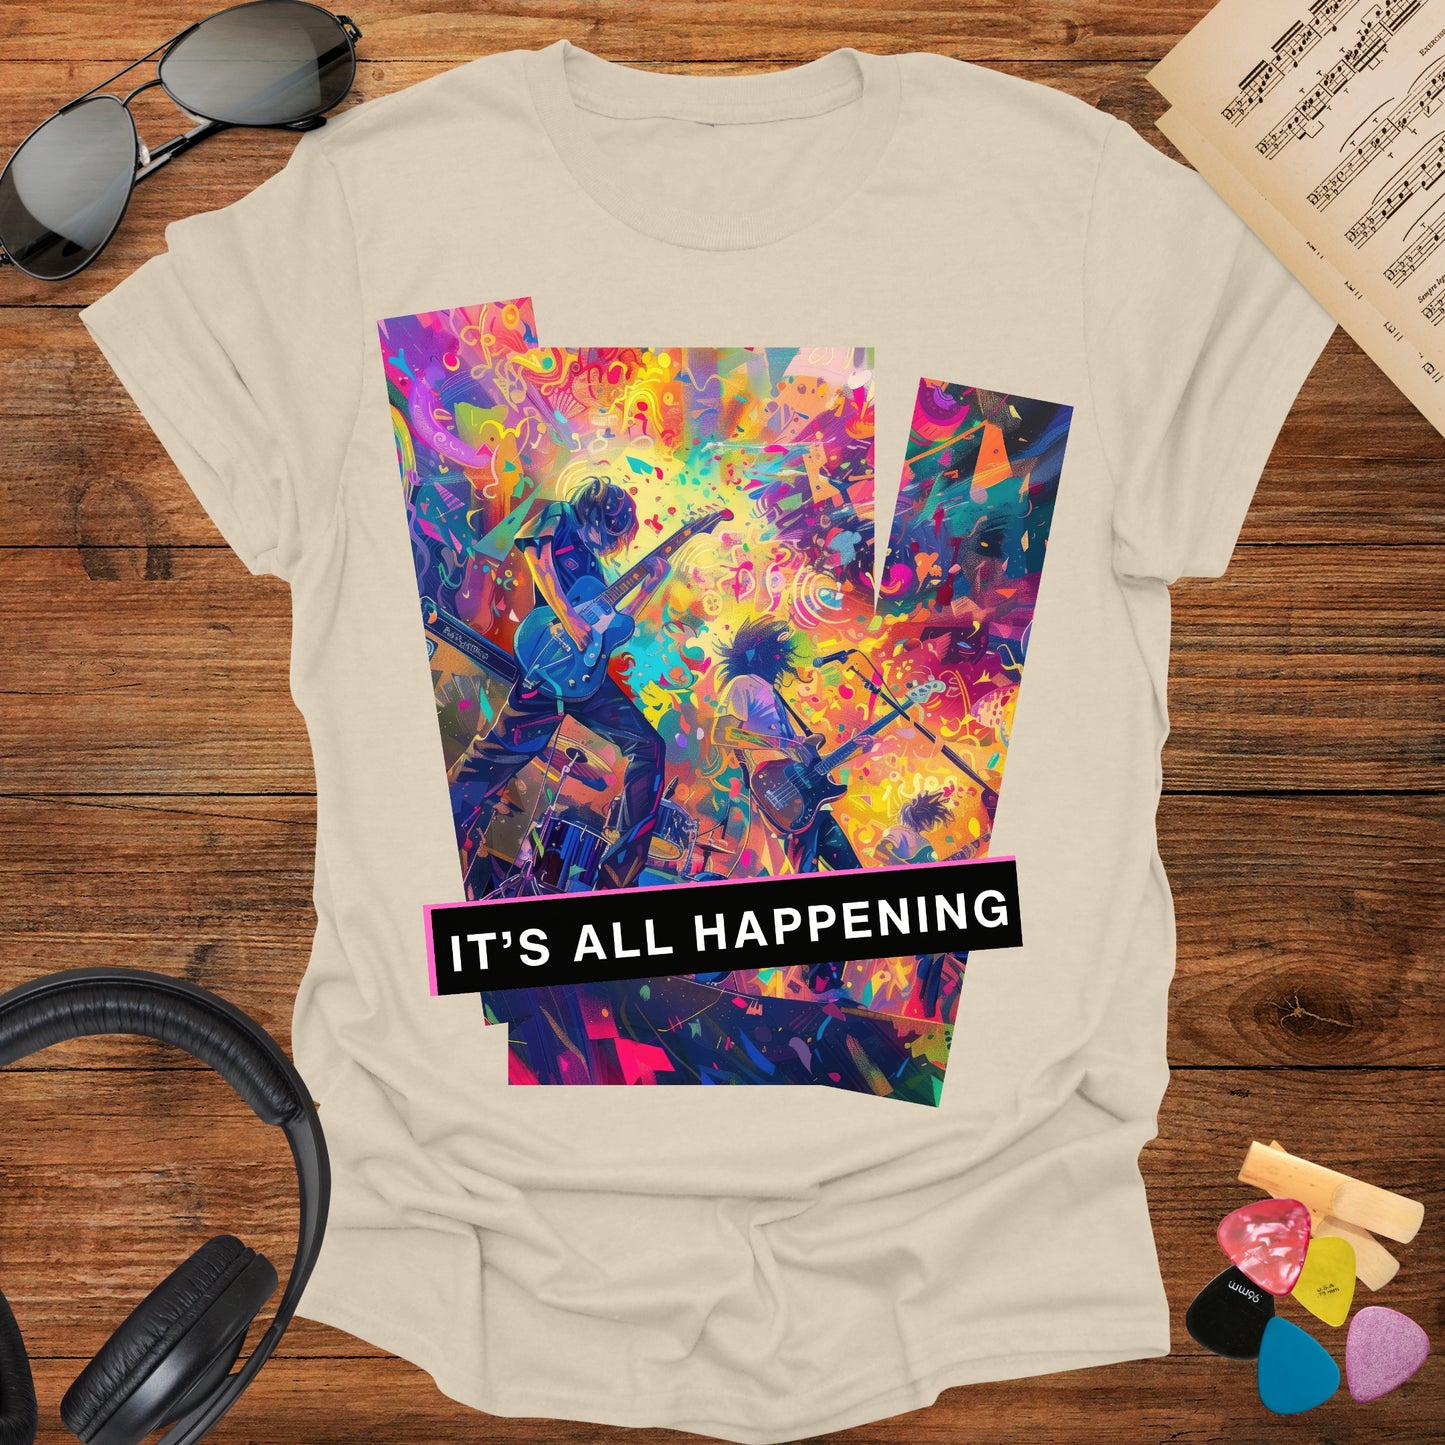 It's All Happening T-shirt